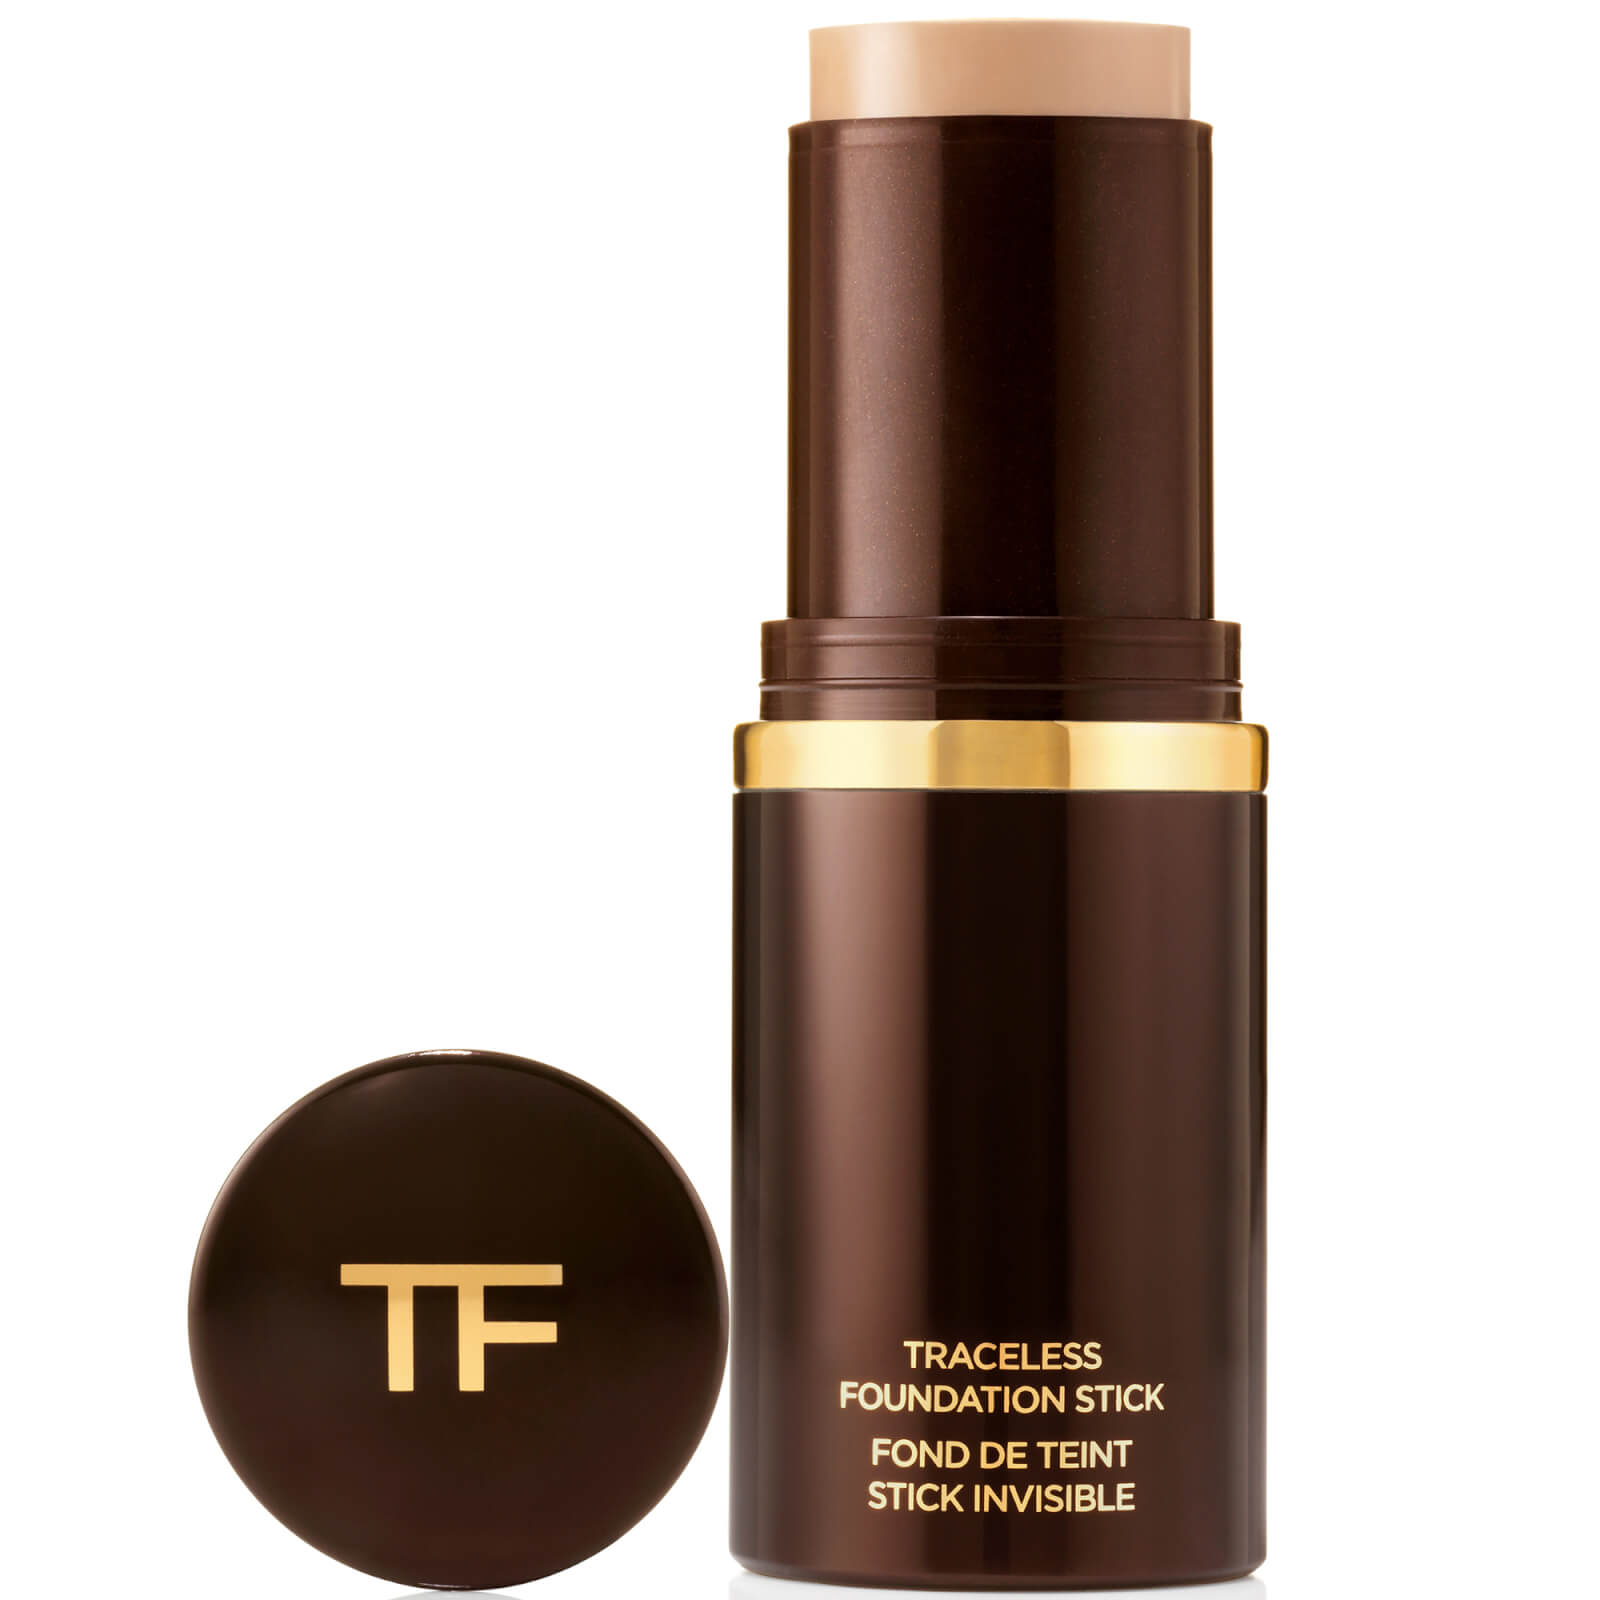 Tom Ford Traceless Foundation Stick 15g (Various Shades) - 0.0 Pearl